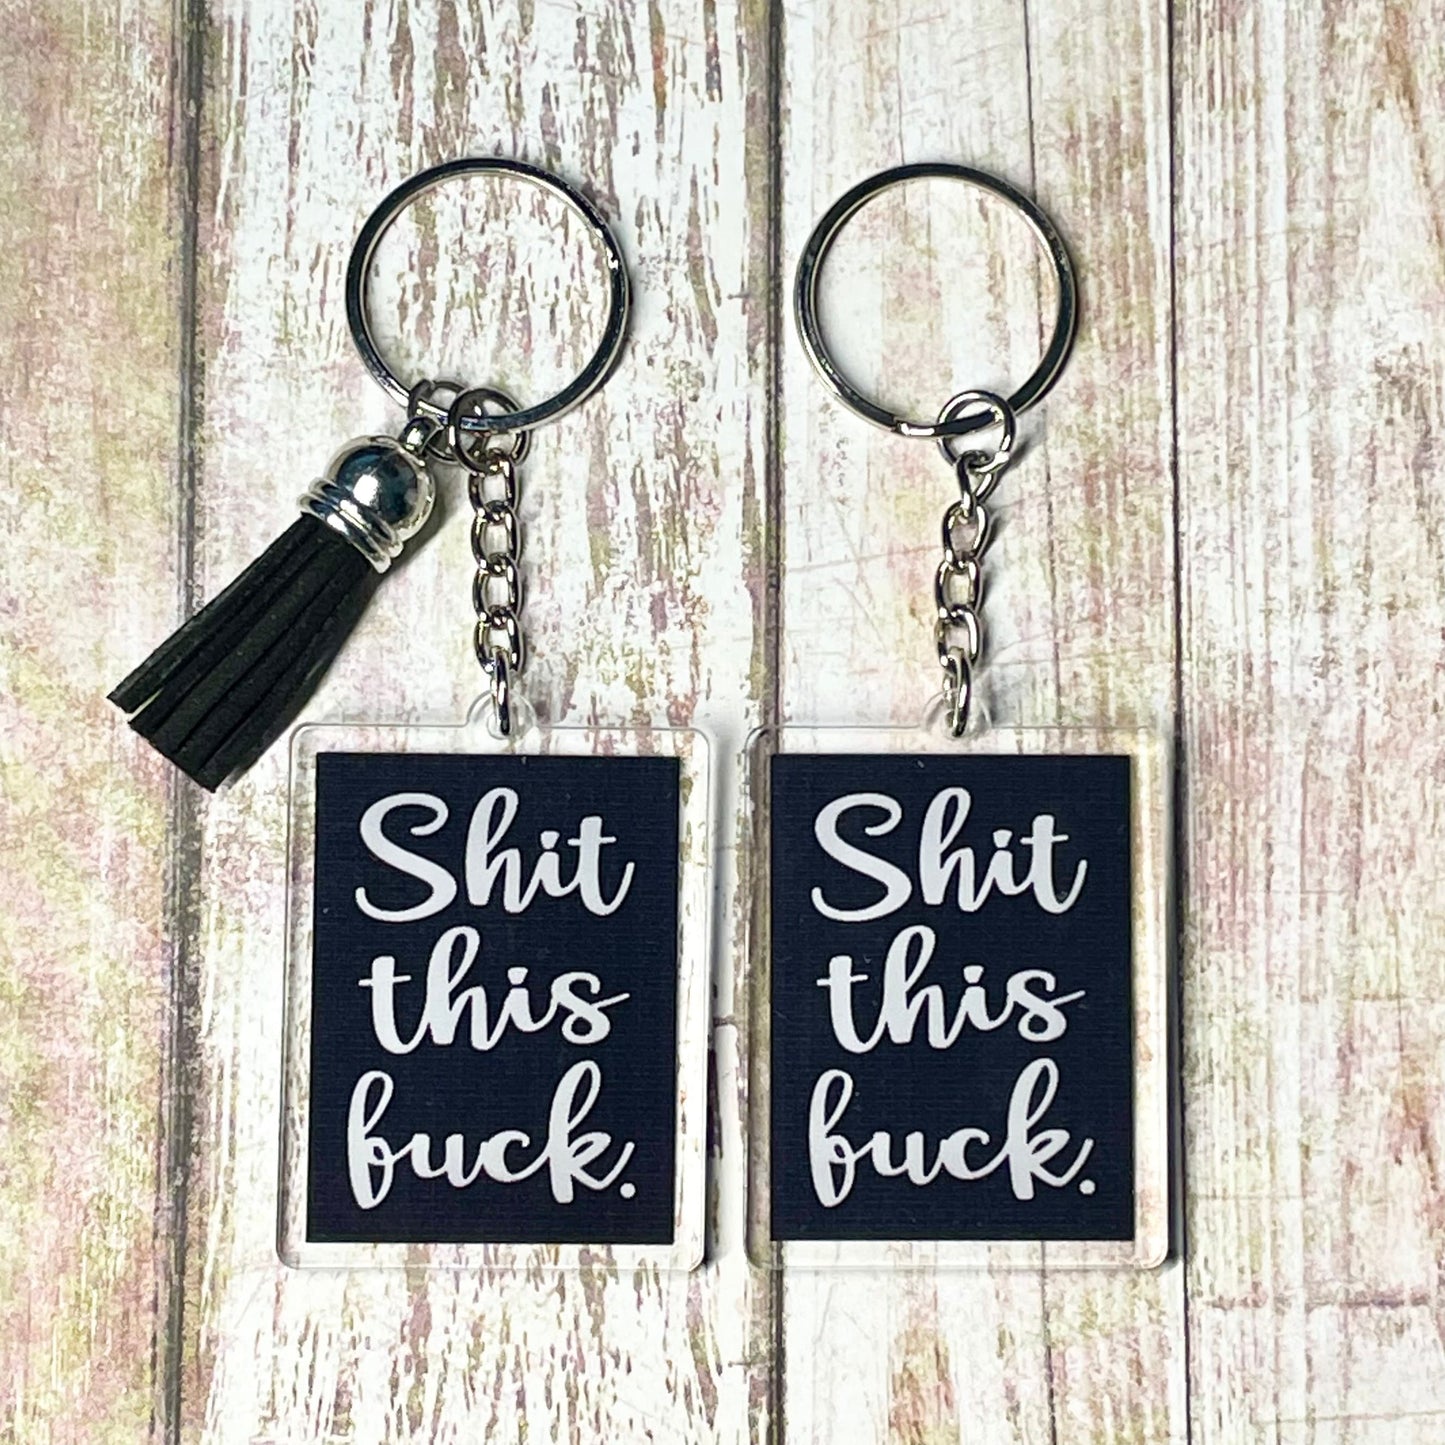 A photo of two black rectangular key chains. Text on keychains reads 'Shit this Fuck.' 